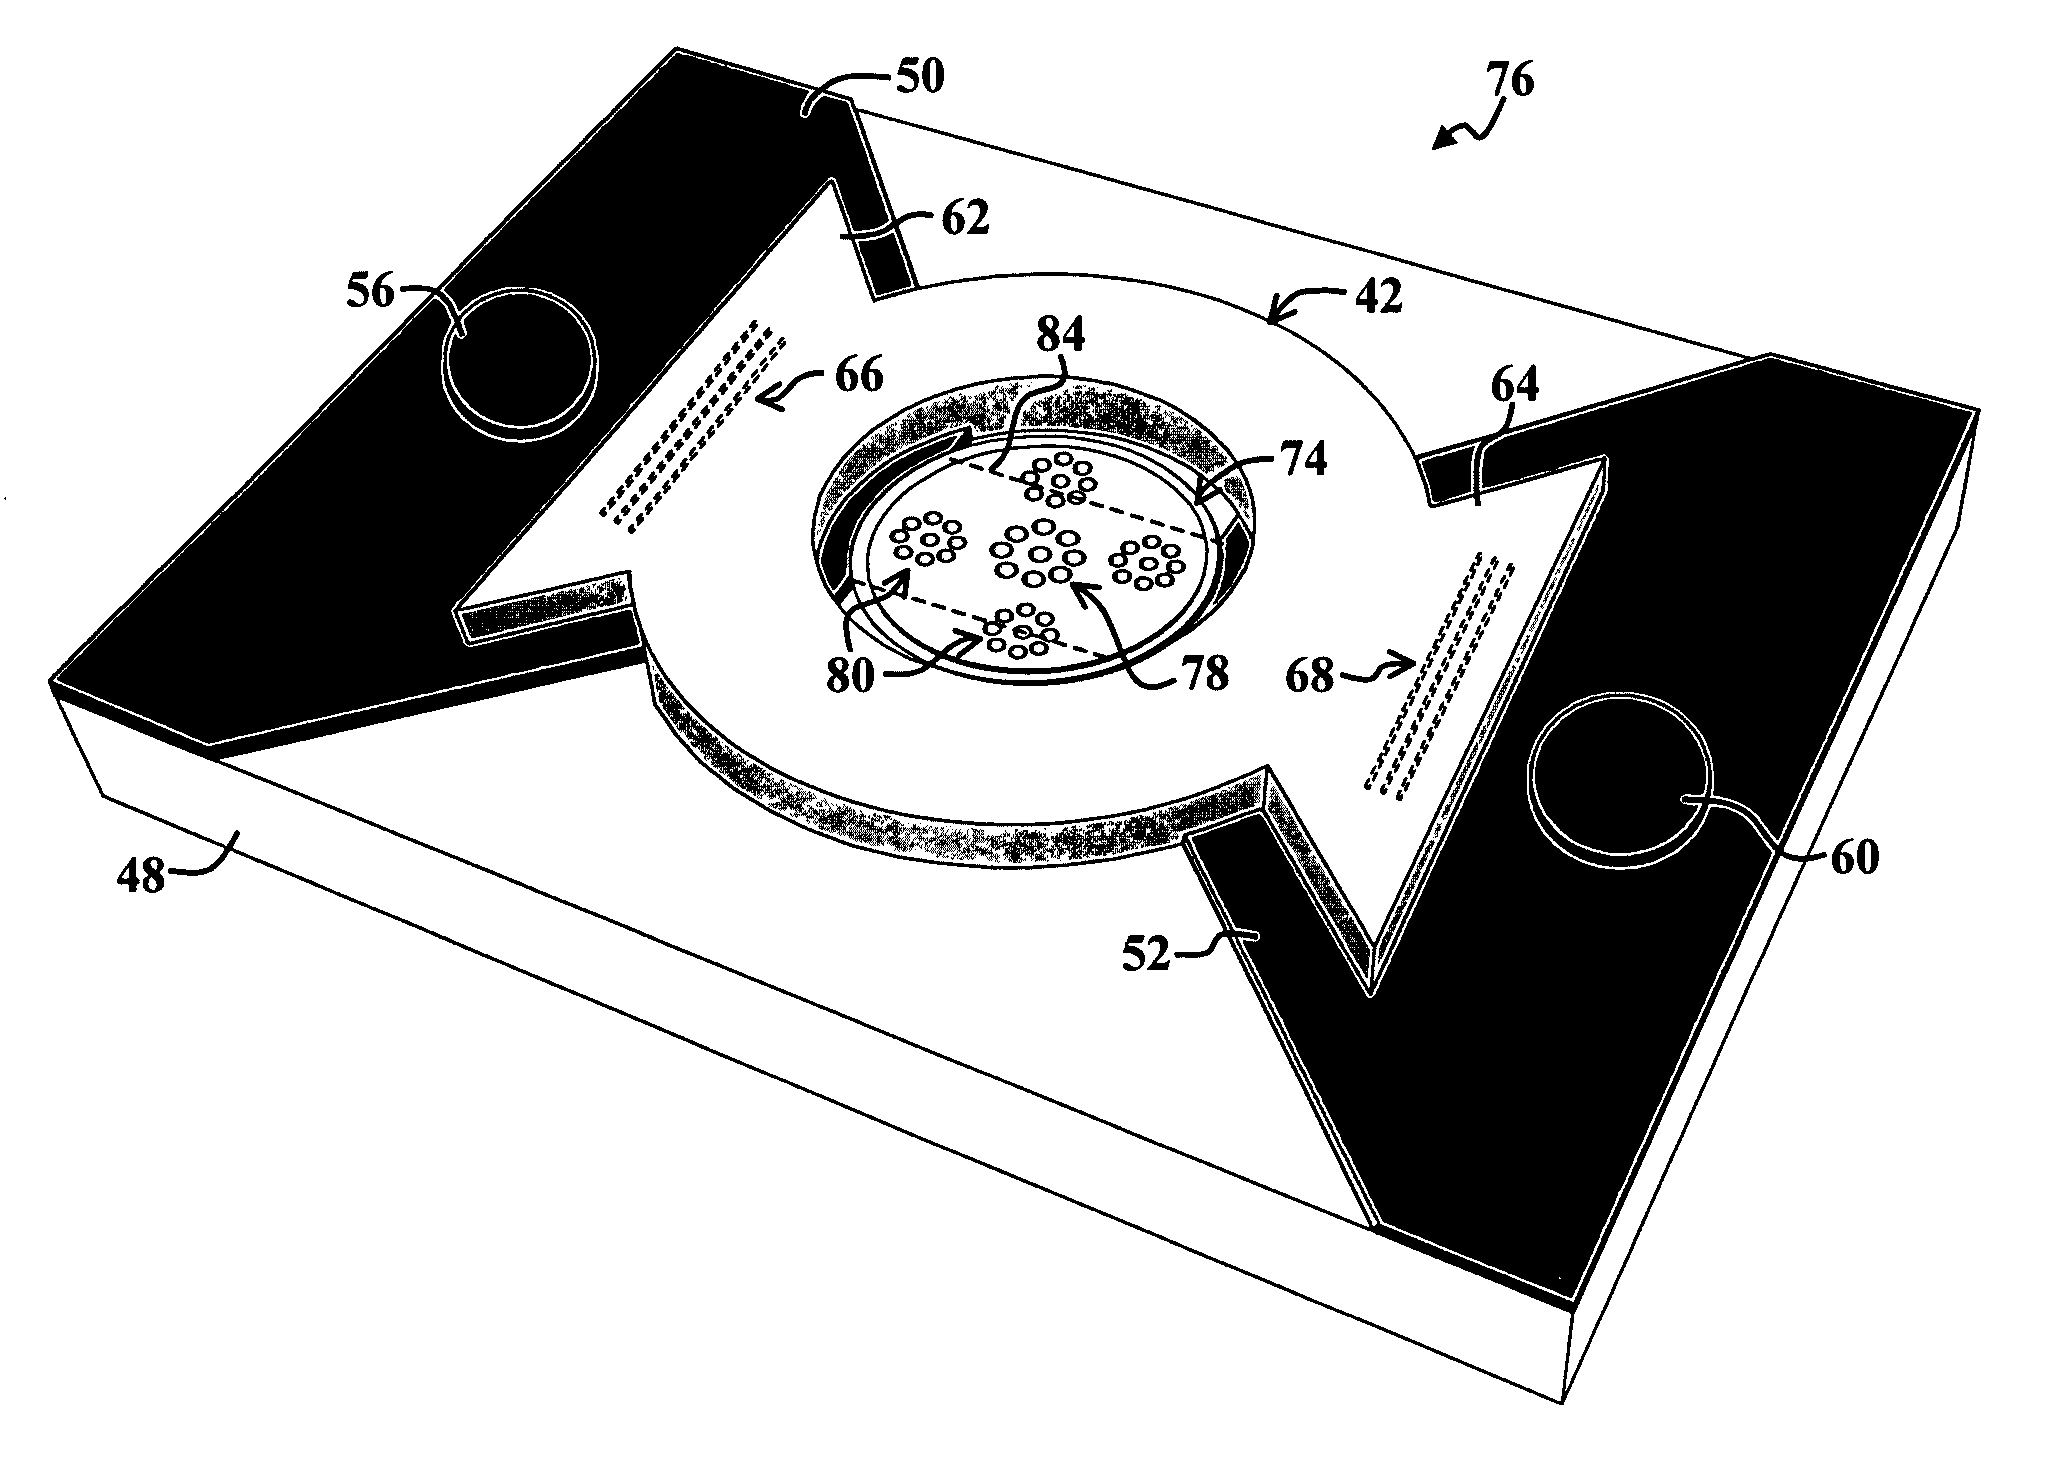 Efficient exploding foil initiator and process for making same